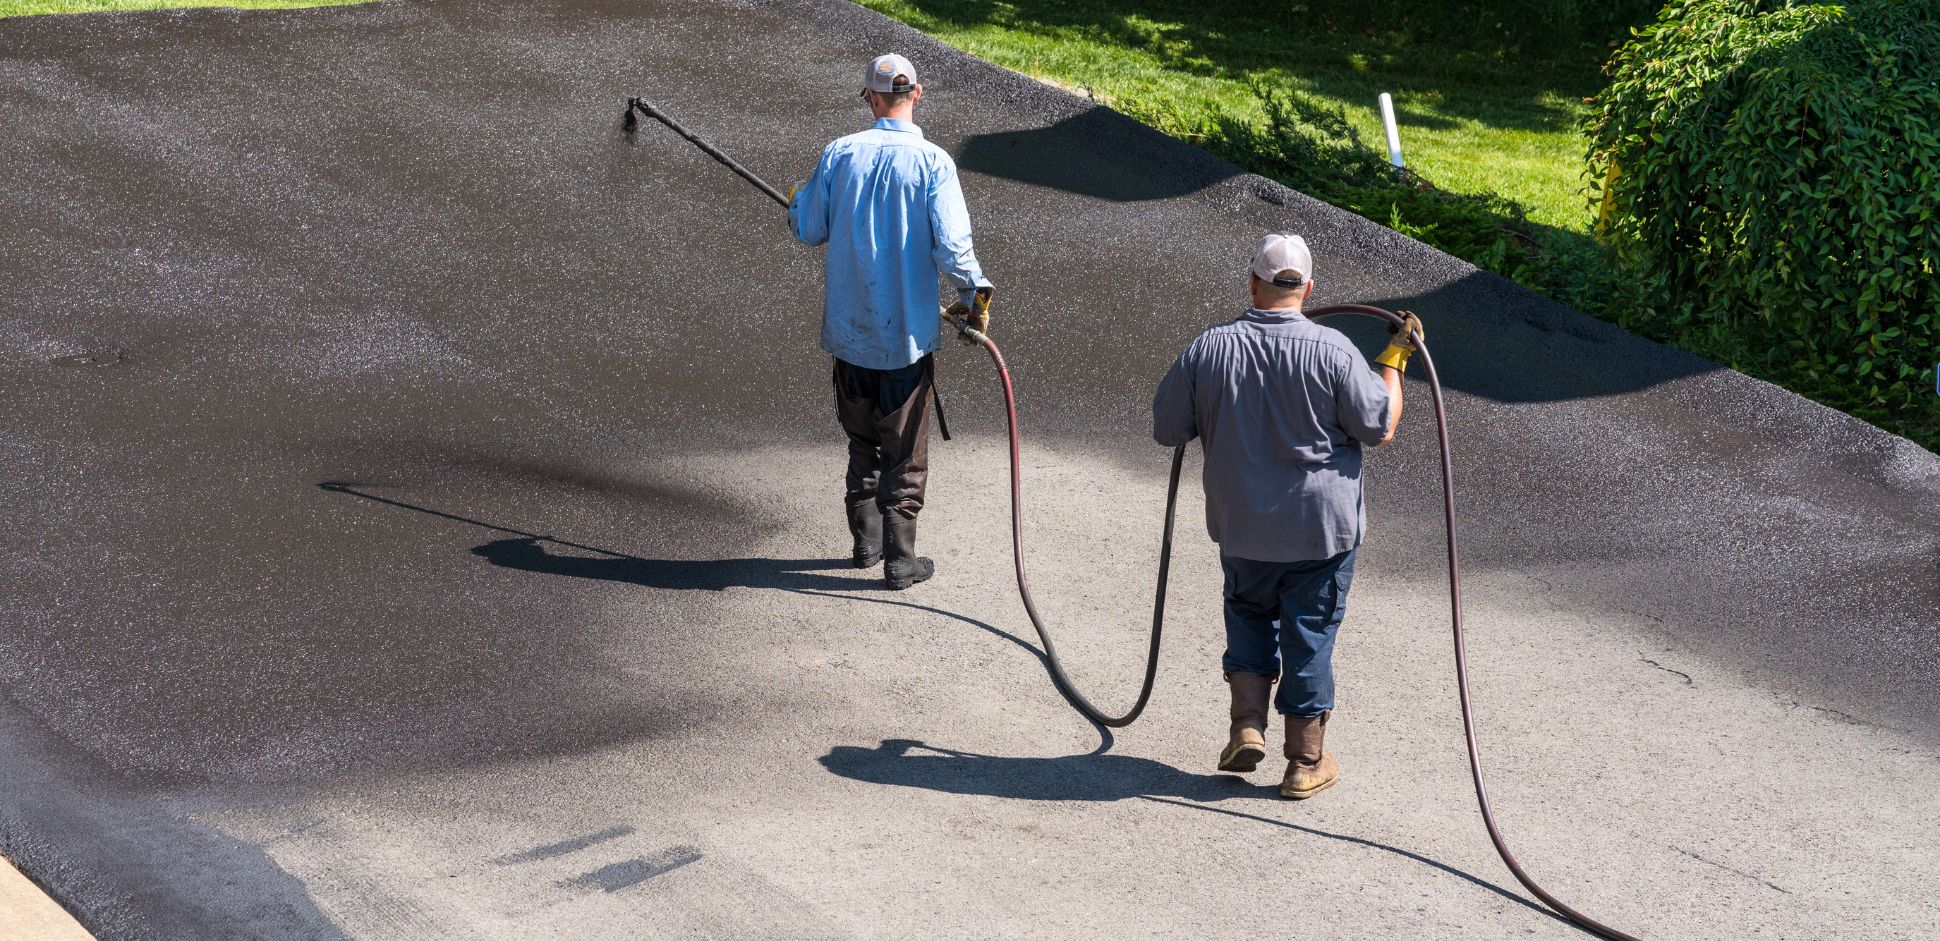 crossroads-paving-ct-driveway-paving-commercial-paving-company